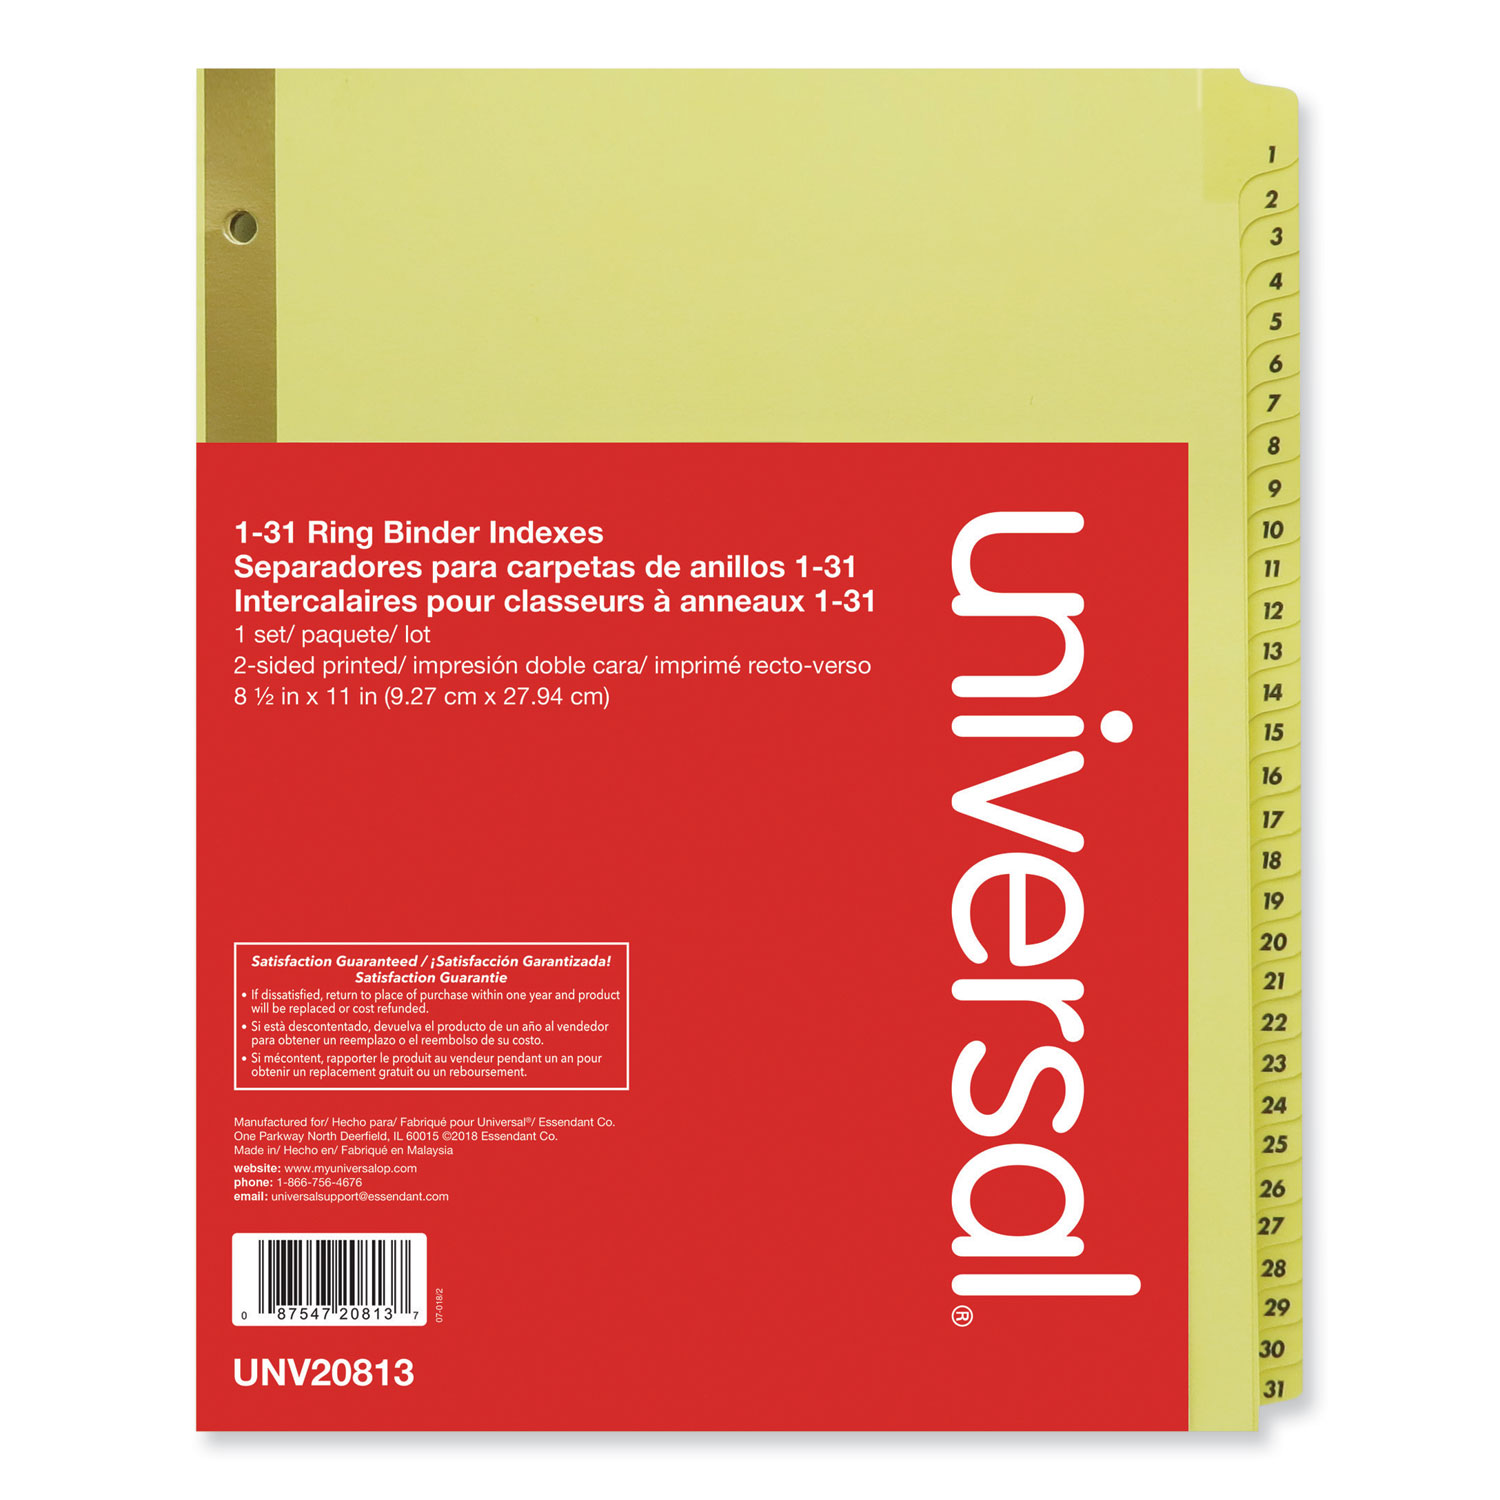  Universal UNV20813 Deluxe Preprinted Plastic Coated Tab Dividers with Black Printing, 31-Tab, 1 to 31, 11 x 8.5, Buff, 1 Set (UNV20813) 